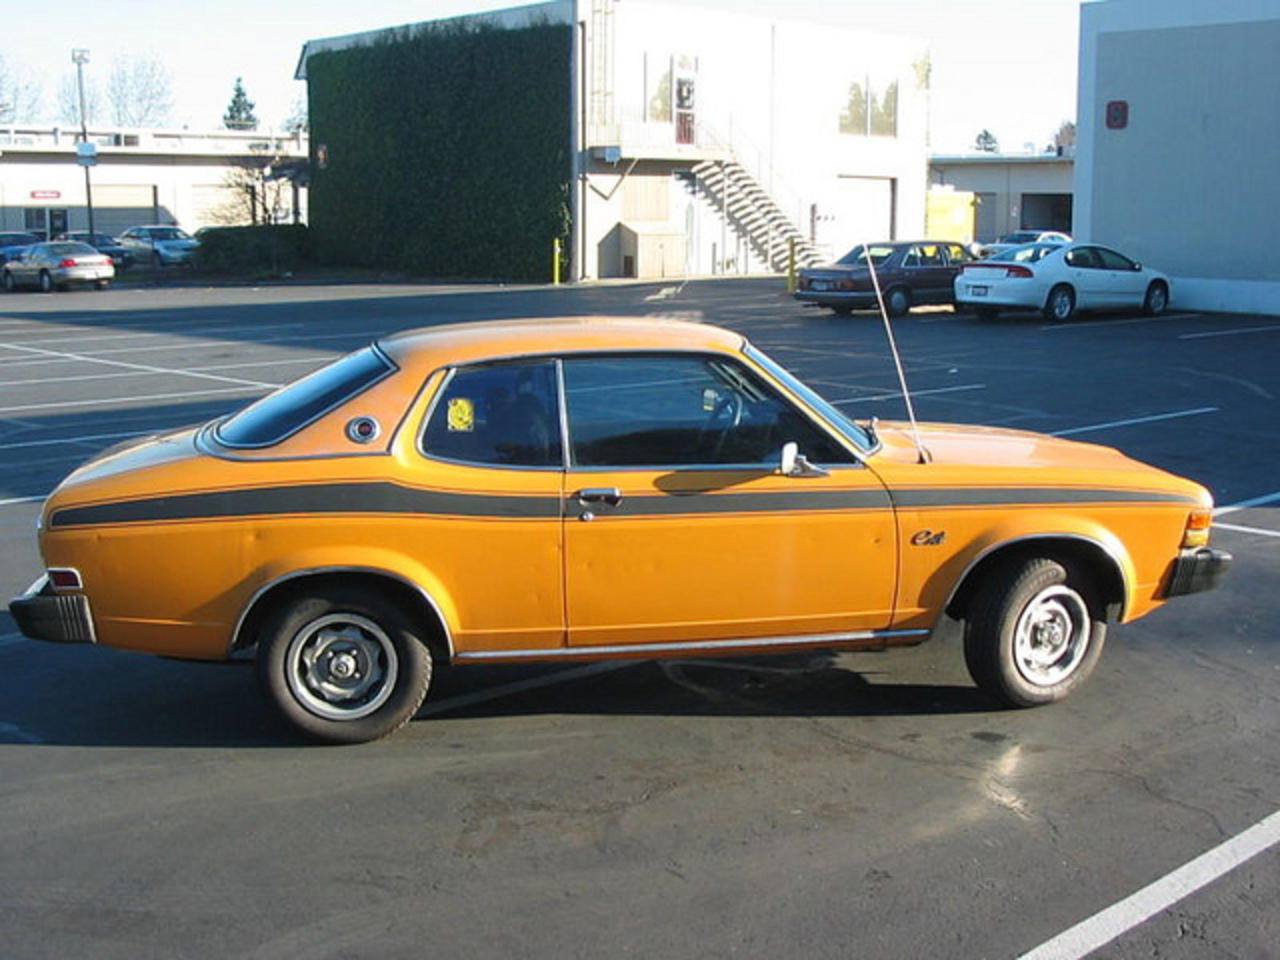 1976 DODGE COLT GT. THE CAR IS AN AUTOMATIC | Flickr - Photo Sharing!